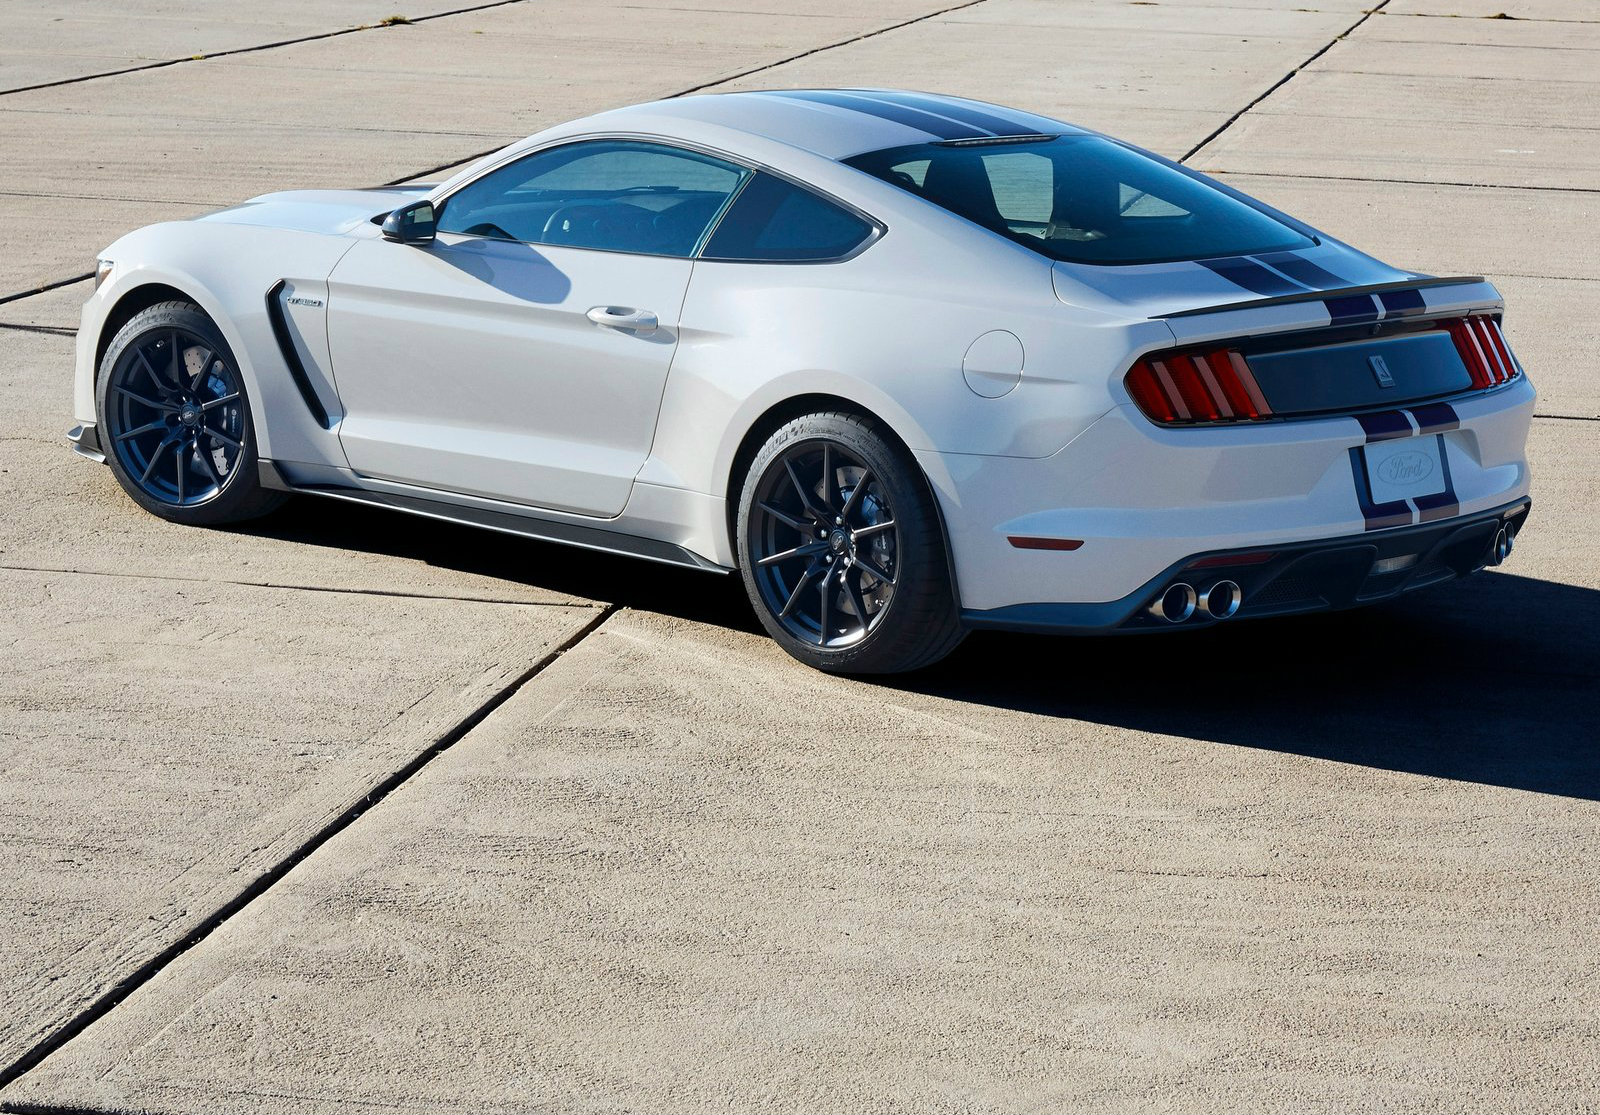 2016 Shelby Gt350 Mustang Options List Leaked Autoevolution